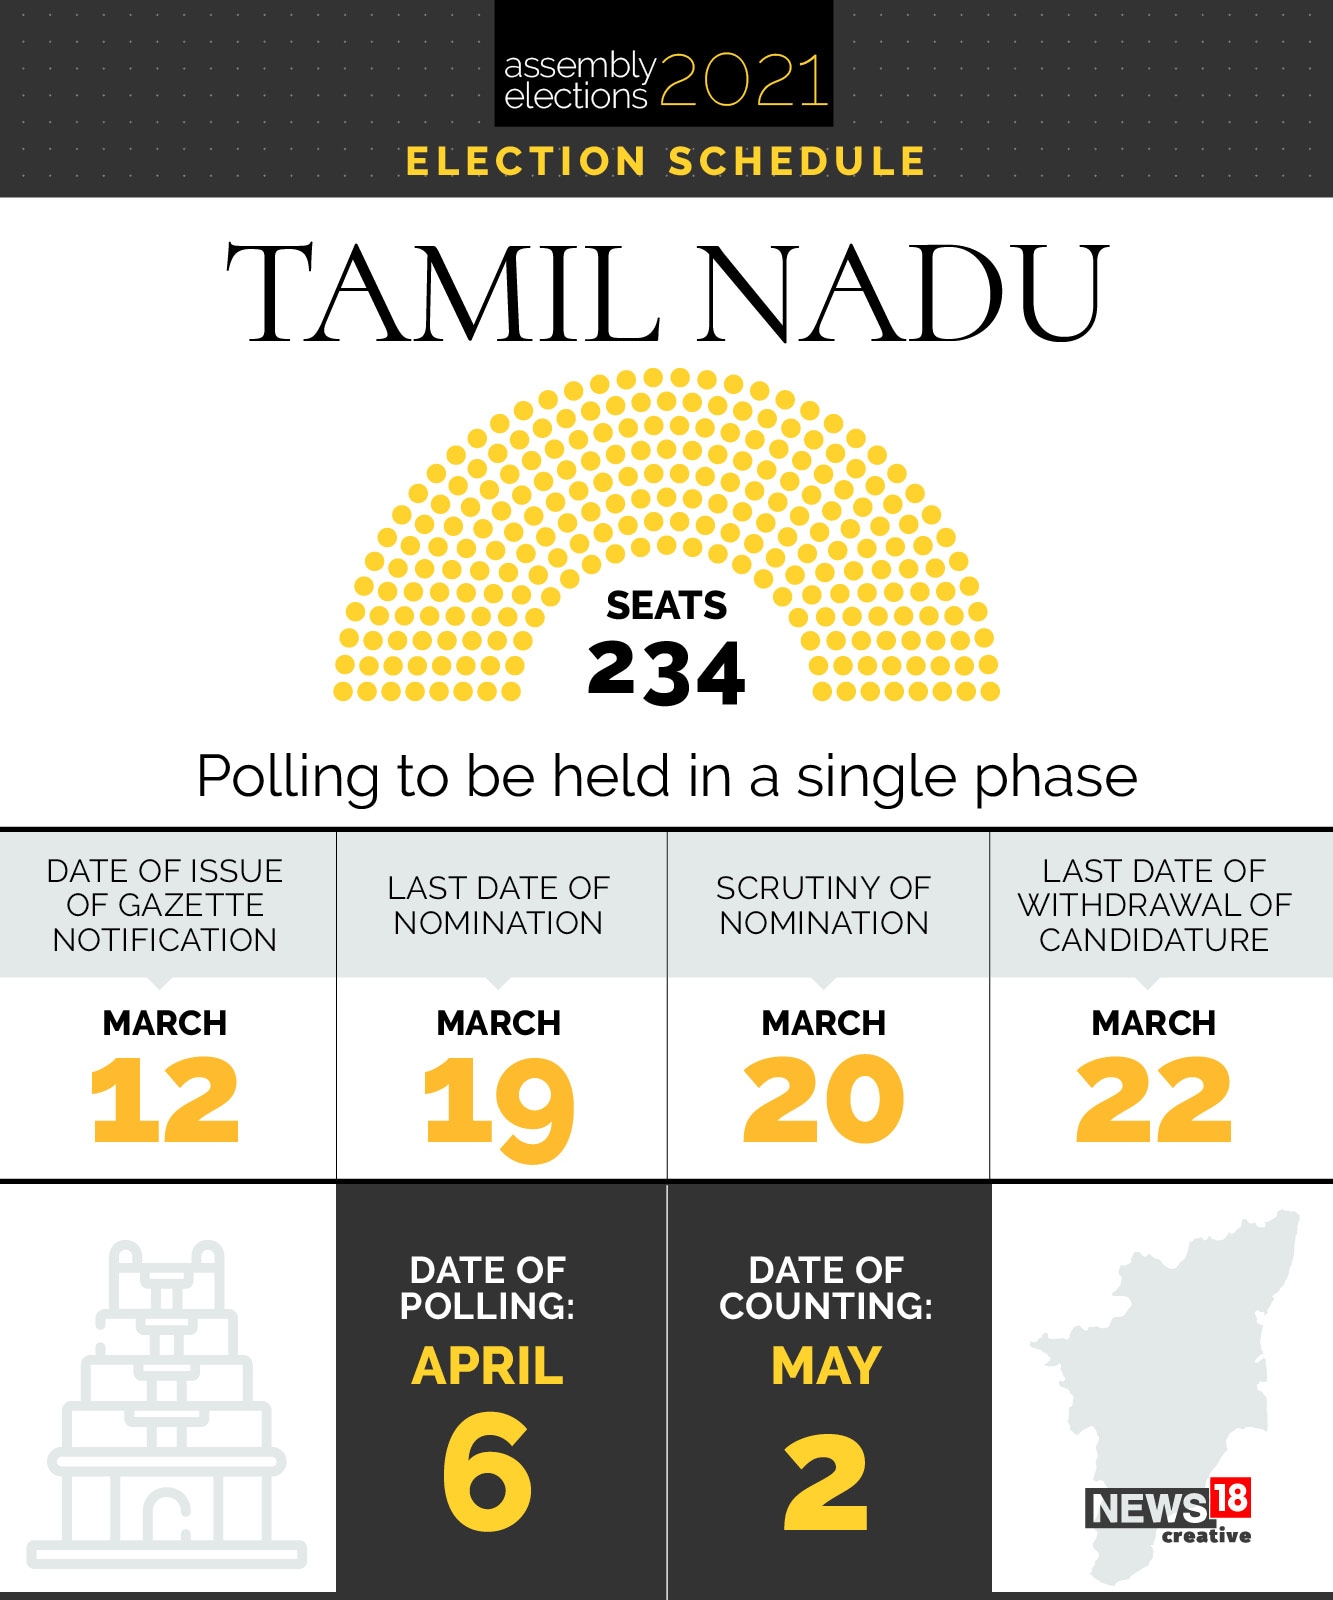 Tamil Nadu Election Schedule 2021 Assembly polls for 234 seats to be